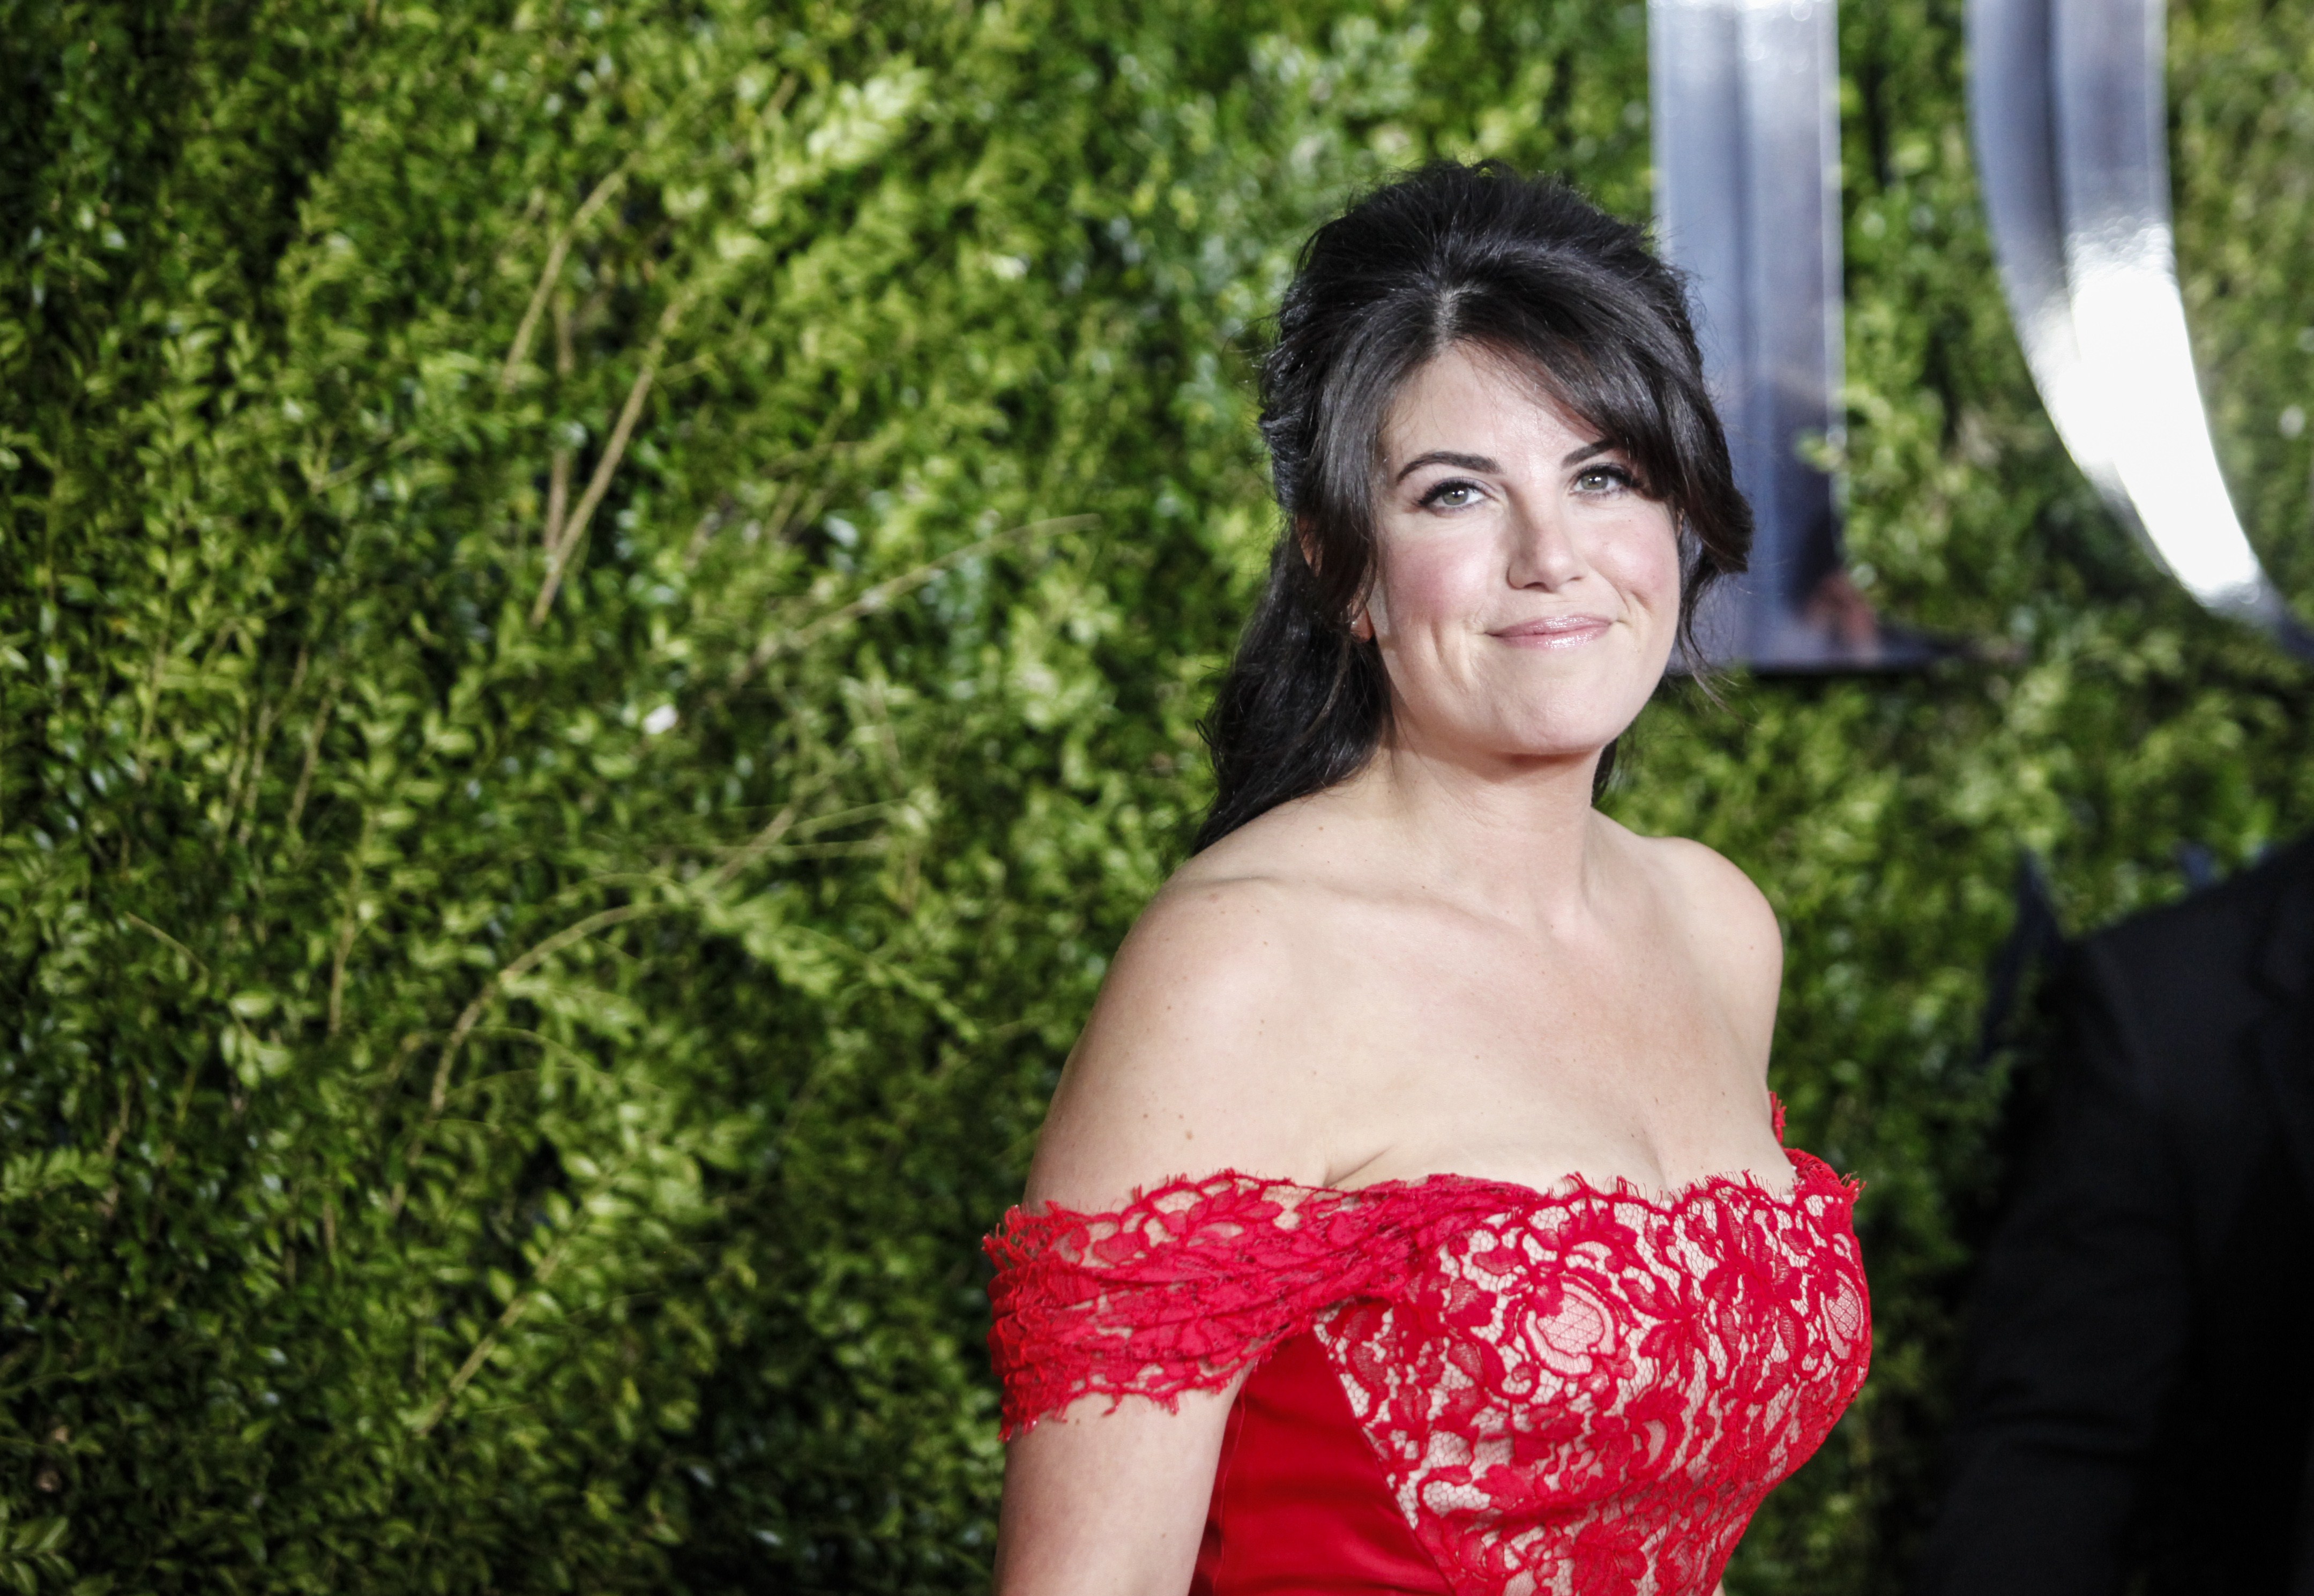 Monica Lewinsky arrives  for the American Theatre Wing's 69th Annual Tony Awards at the Radio City Music Hall in New York City on June 7, 2015.   AFP PHOTO/ KENA BETANCUR        (Photo credit should read KENA BETANCUR/AFP/Getty Images) (KENA BETANCUR—AFP/Getty Images)